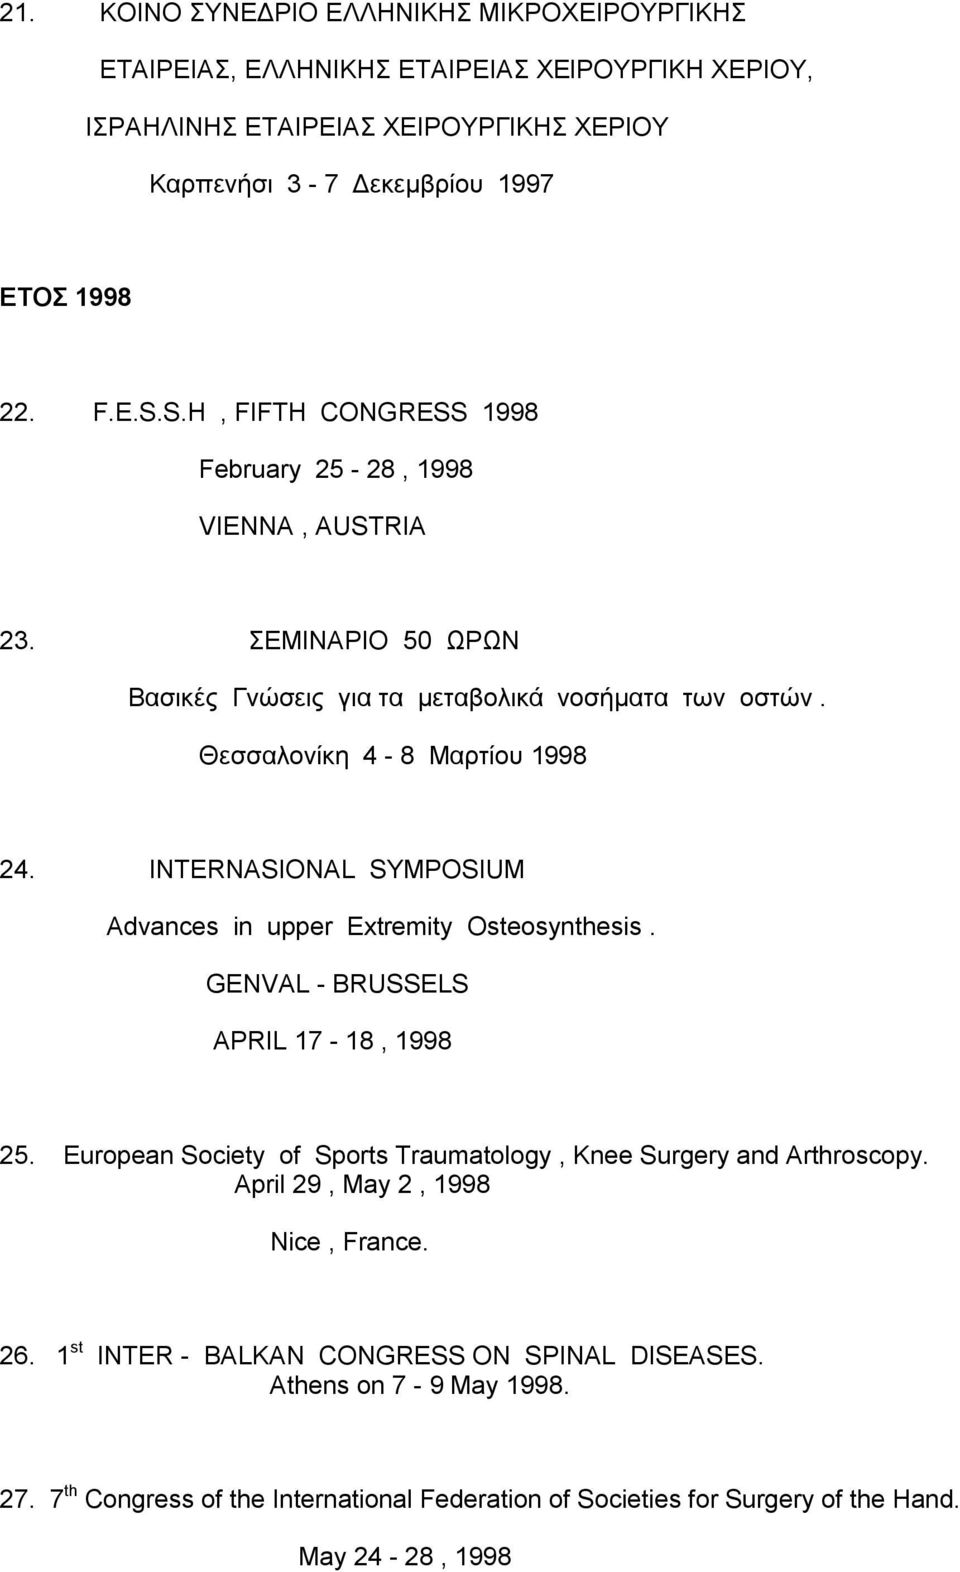 INTERNASIONAL SYMPOSIUM Advances in upper Extremity Osteosynthesis. GENVAL - BRUSSELS APRIL 17-18, 1998 25. European Society of Sports Traumatology, Knee Surgery and Arthroscopy.